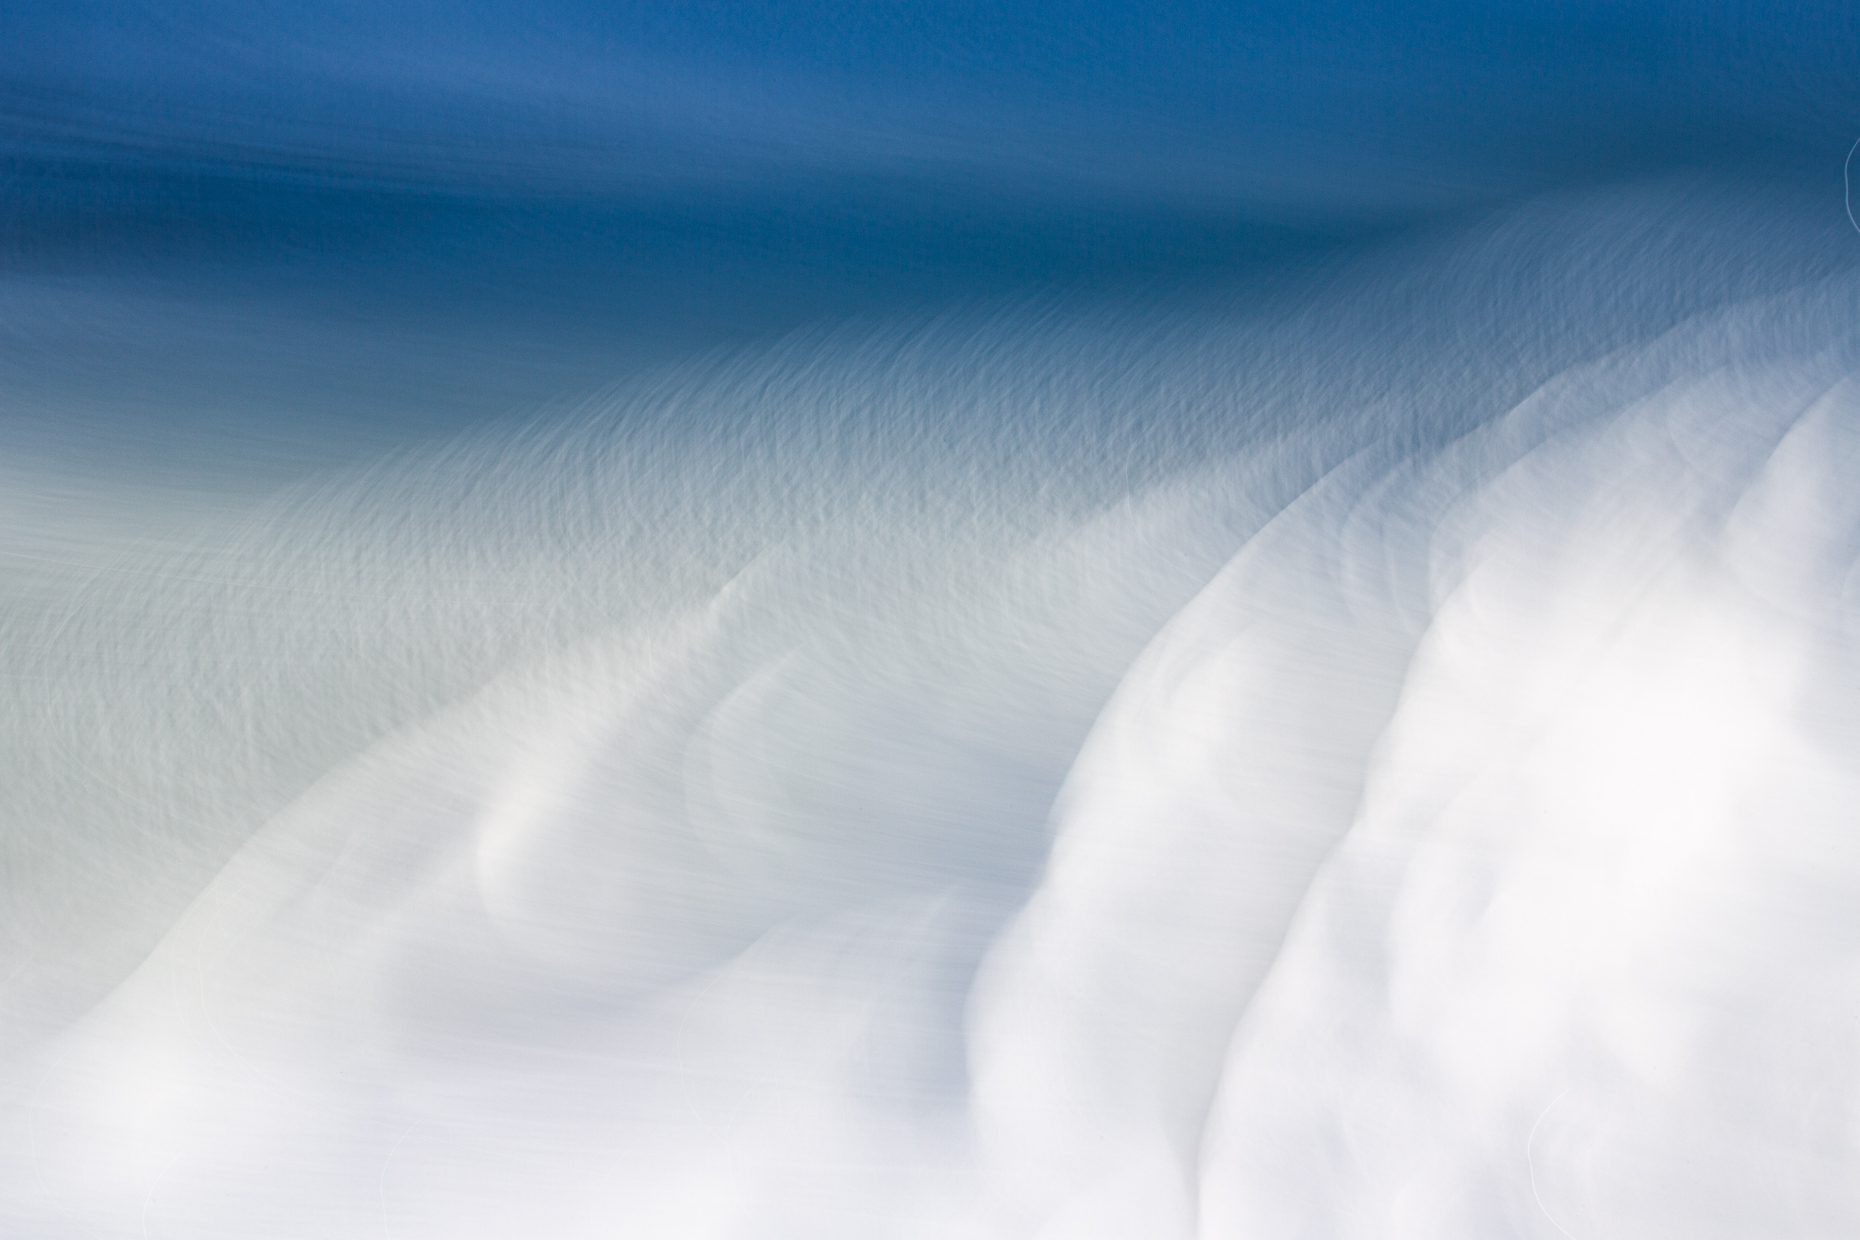 BECOMING_RIVER_ICM_GRIEF_CLIMATE_CHANGE_WINTER_ICE_SAINT_LAWRENCE_RIVER_QUEBEC_CANADA-2